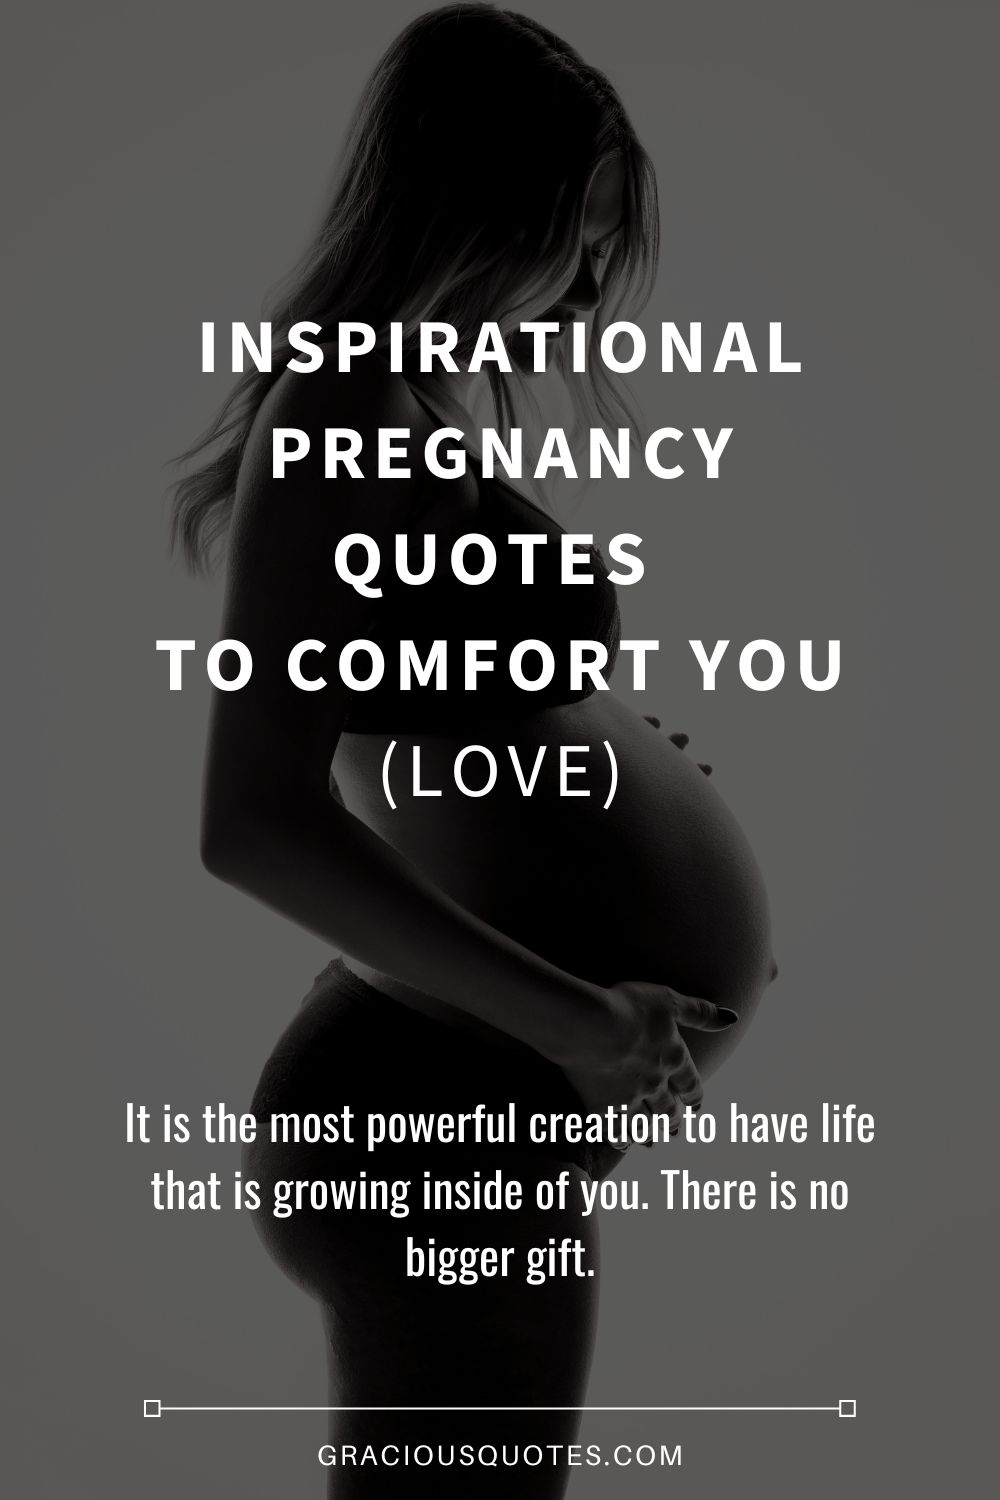 Inspirational Pregnancy Quotes to Comfort You (LOVE) - Gracious Quotes